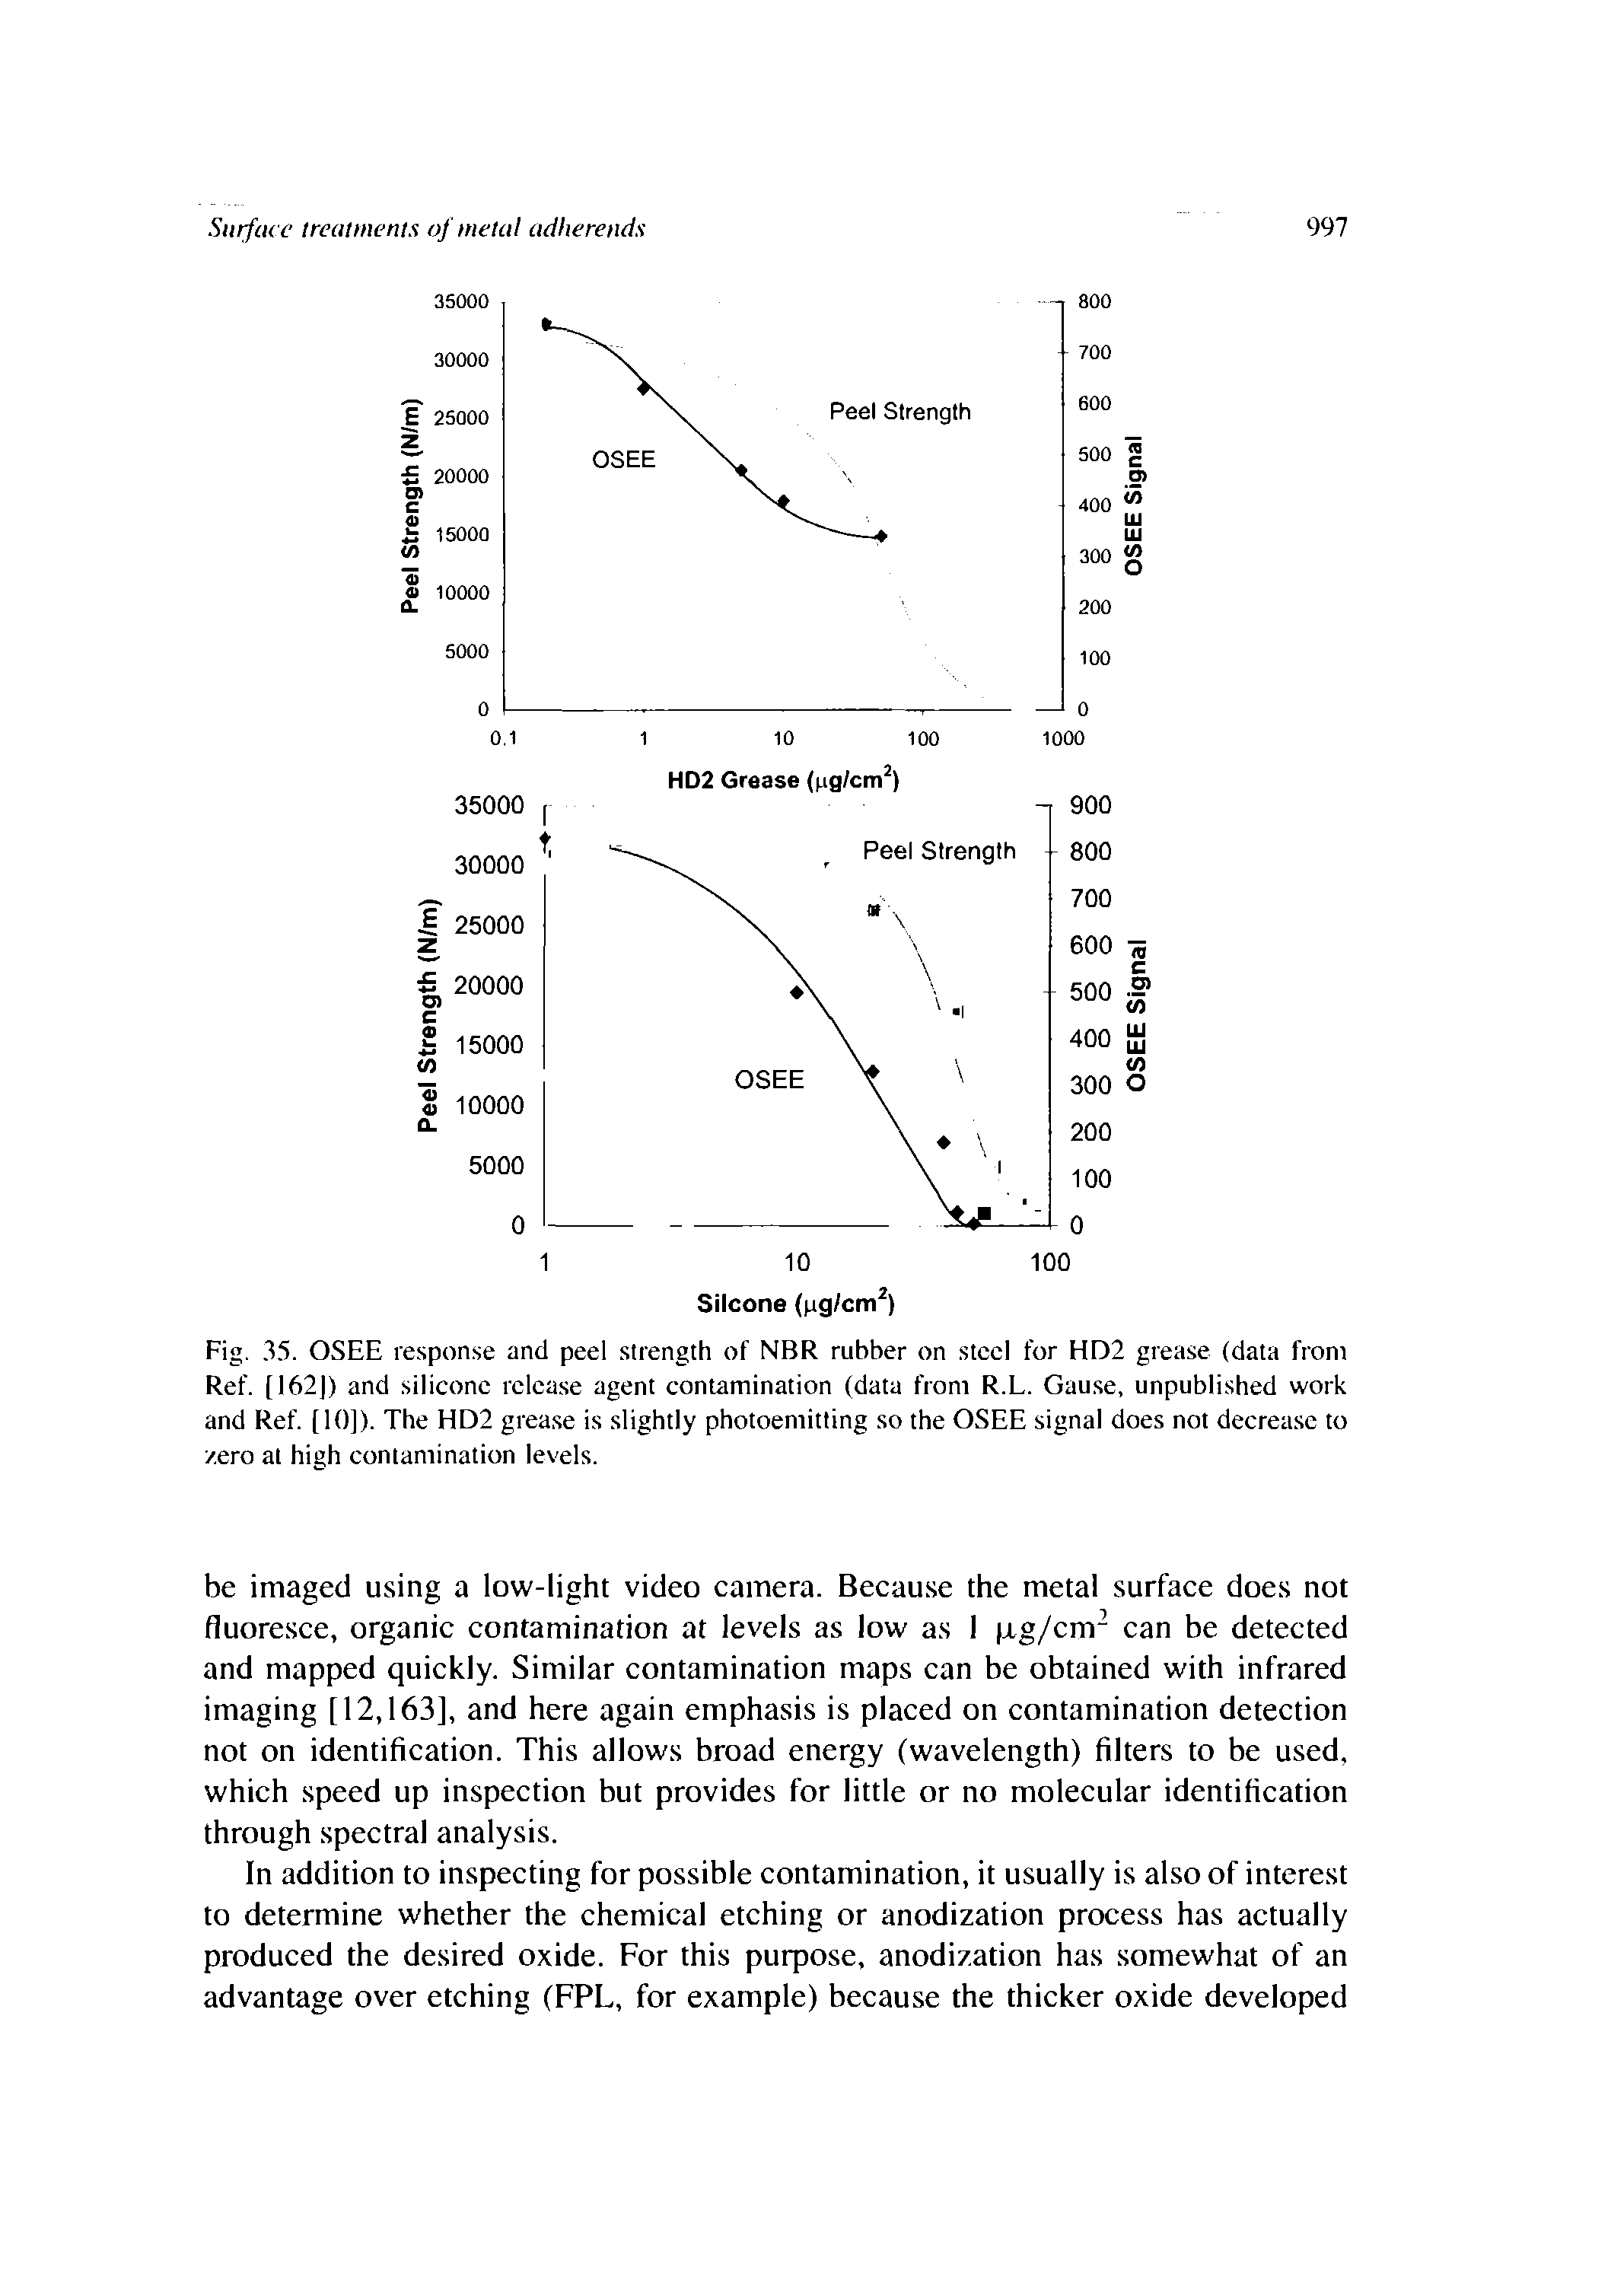 Fig. 35. OSEE response and peel strength of NBR rubber on steel for HD2 grease (data from Ref. [162]) and silicone release agent contamination (data from R.L. Cause, unpublished work and Ref. [10]). The HD2 grease is slightly photoemitting so the OSEE signal does not decrease to zero at high contamination levels.